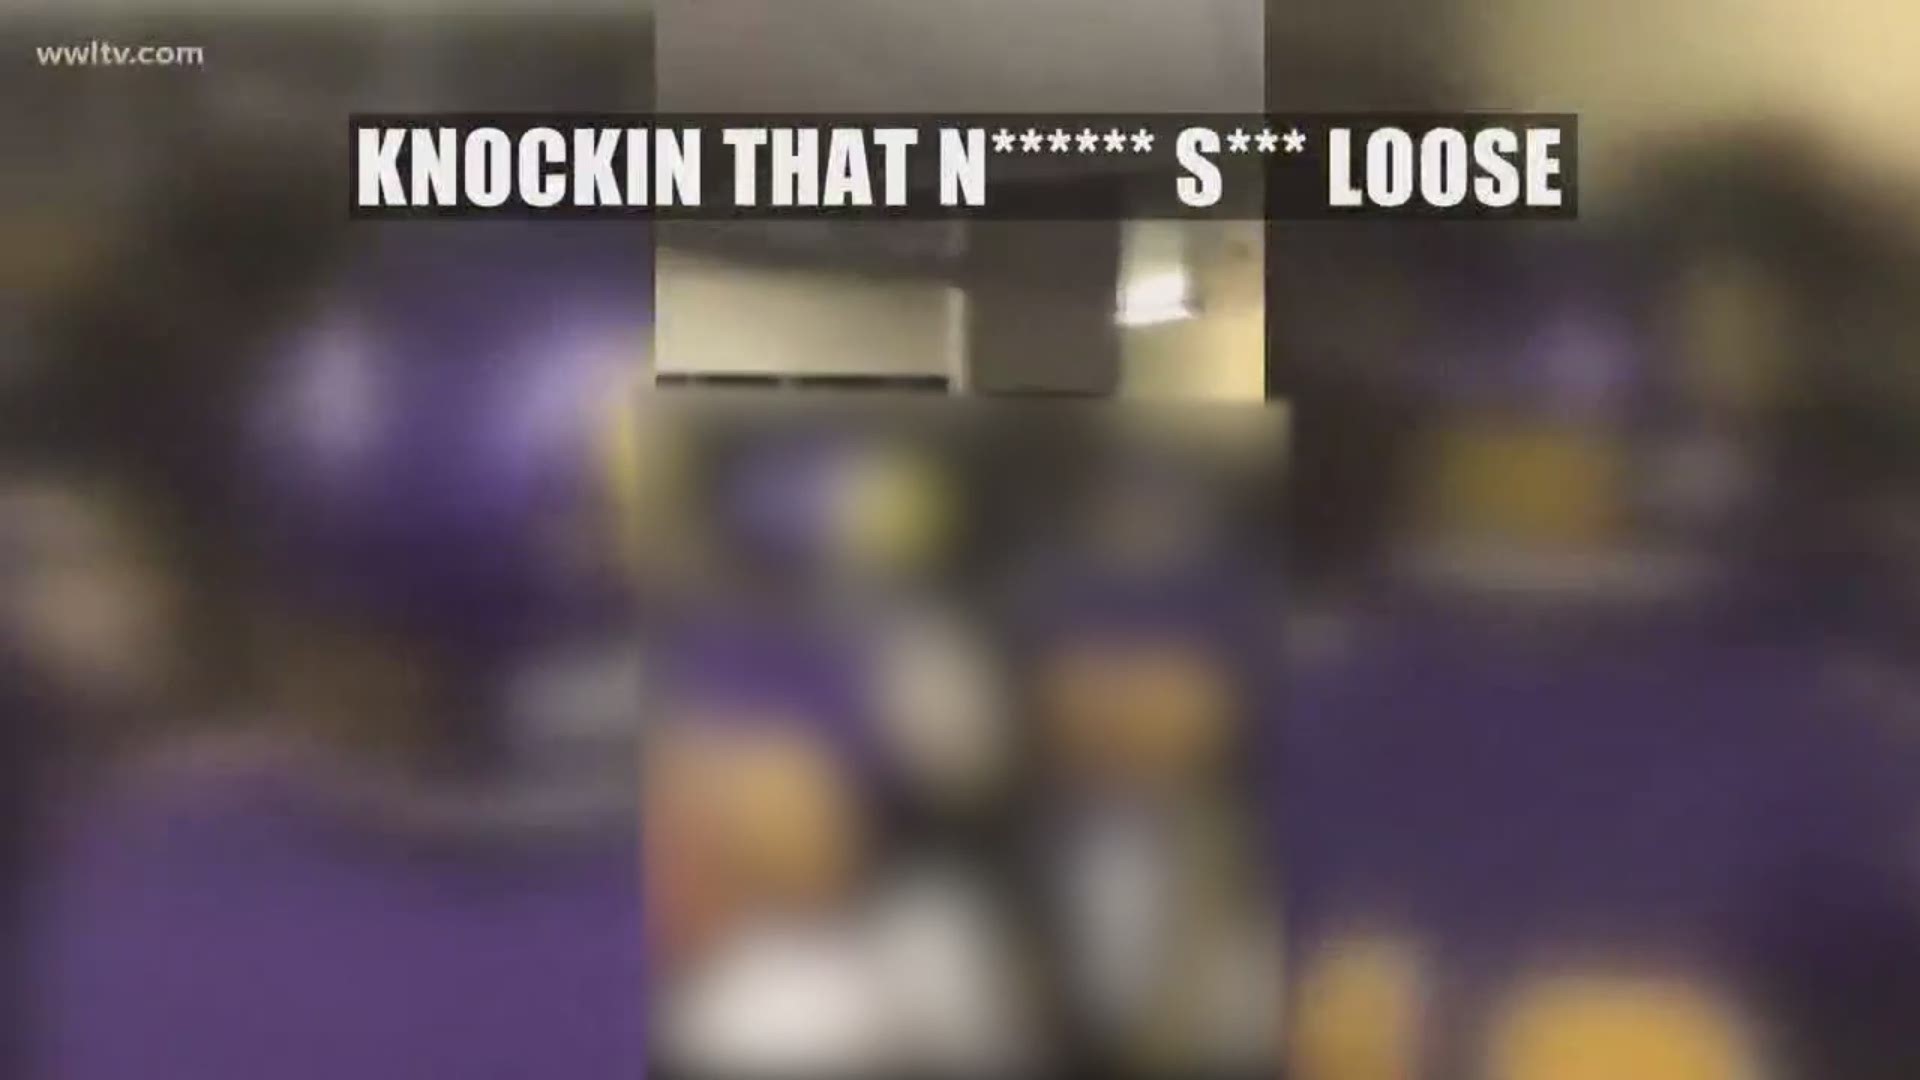 In these videos, you can hear the repeated use of the 'N-word' from a member of the coaching staff and players on the football team.